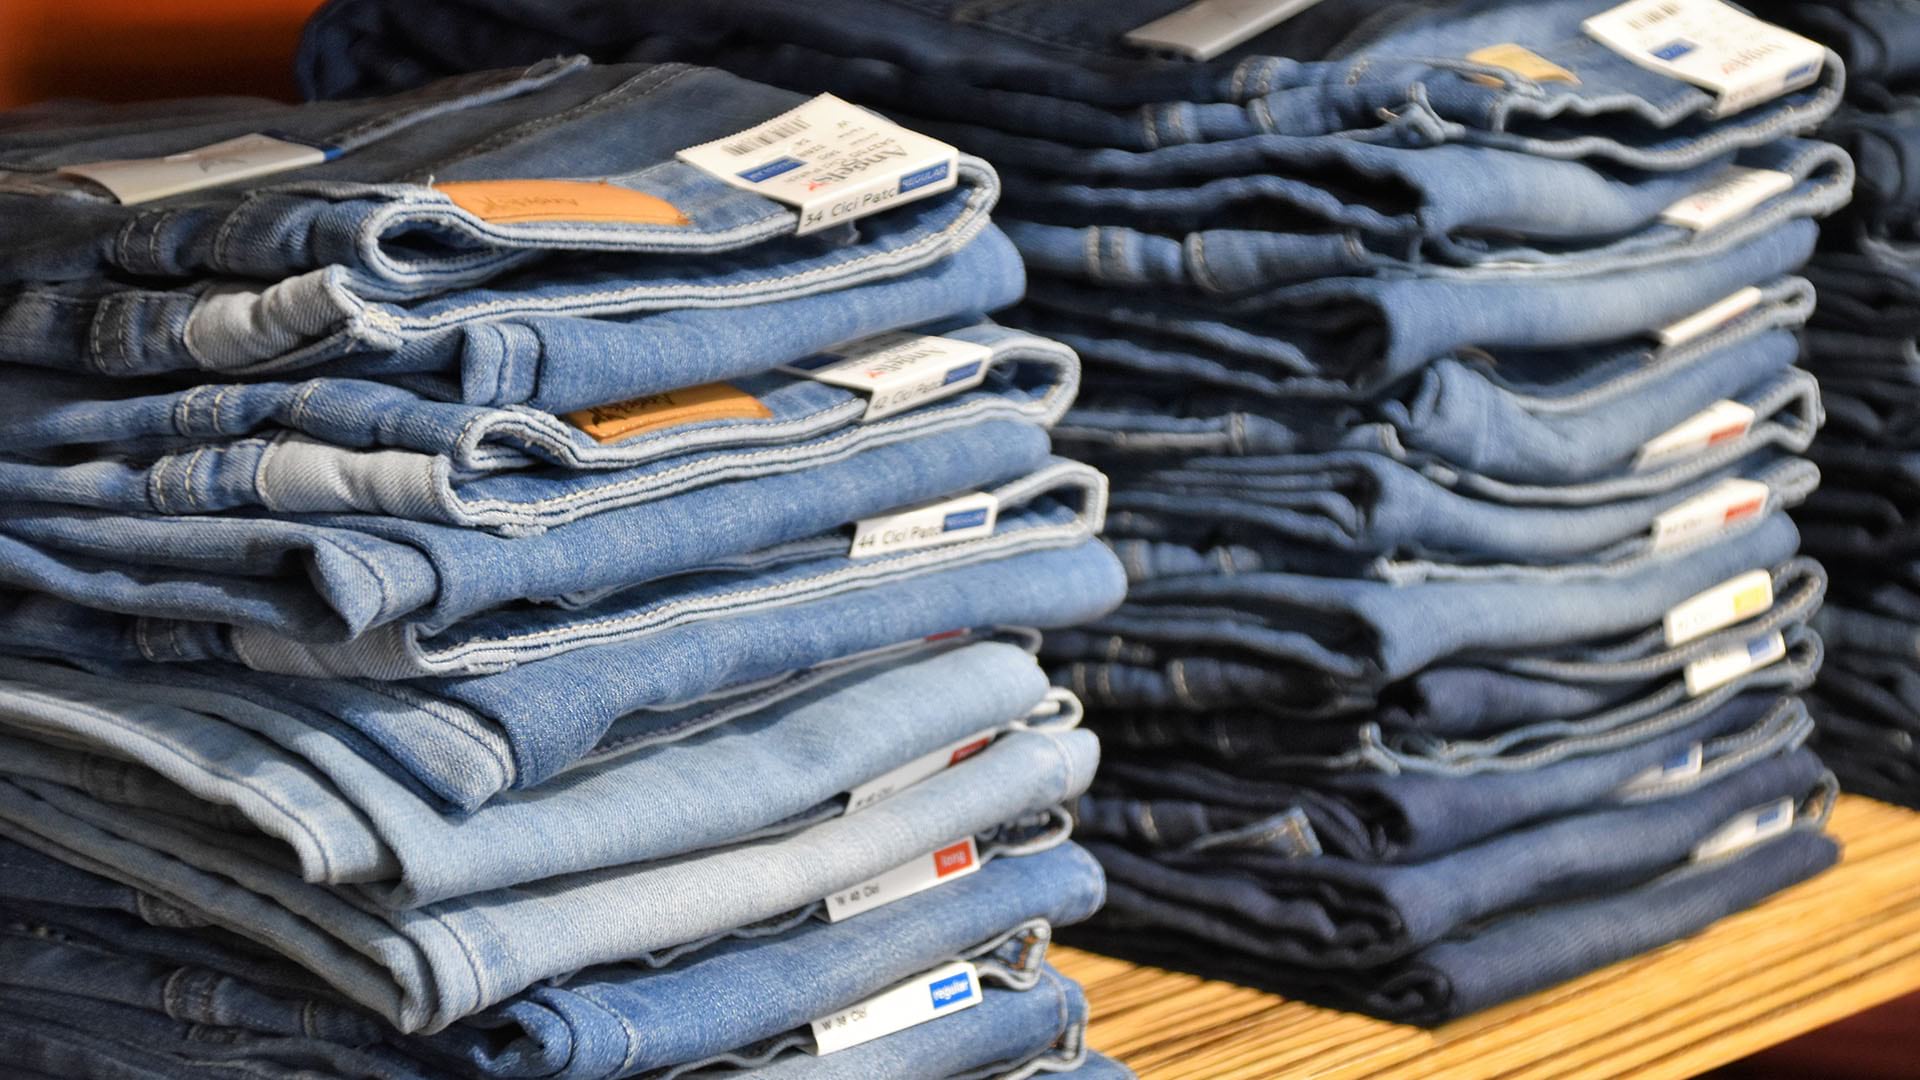 Buying jeans in red states and blue states